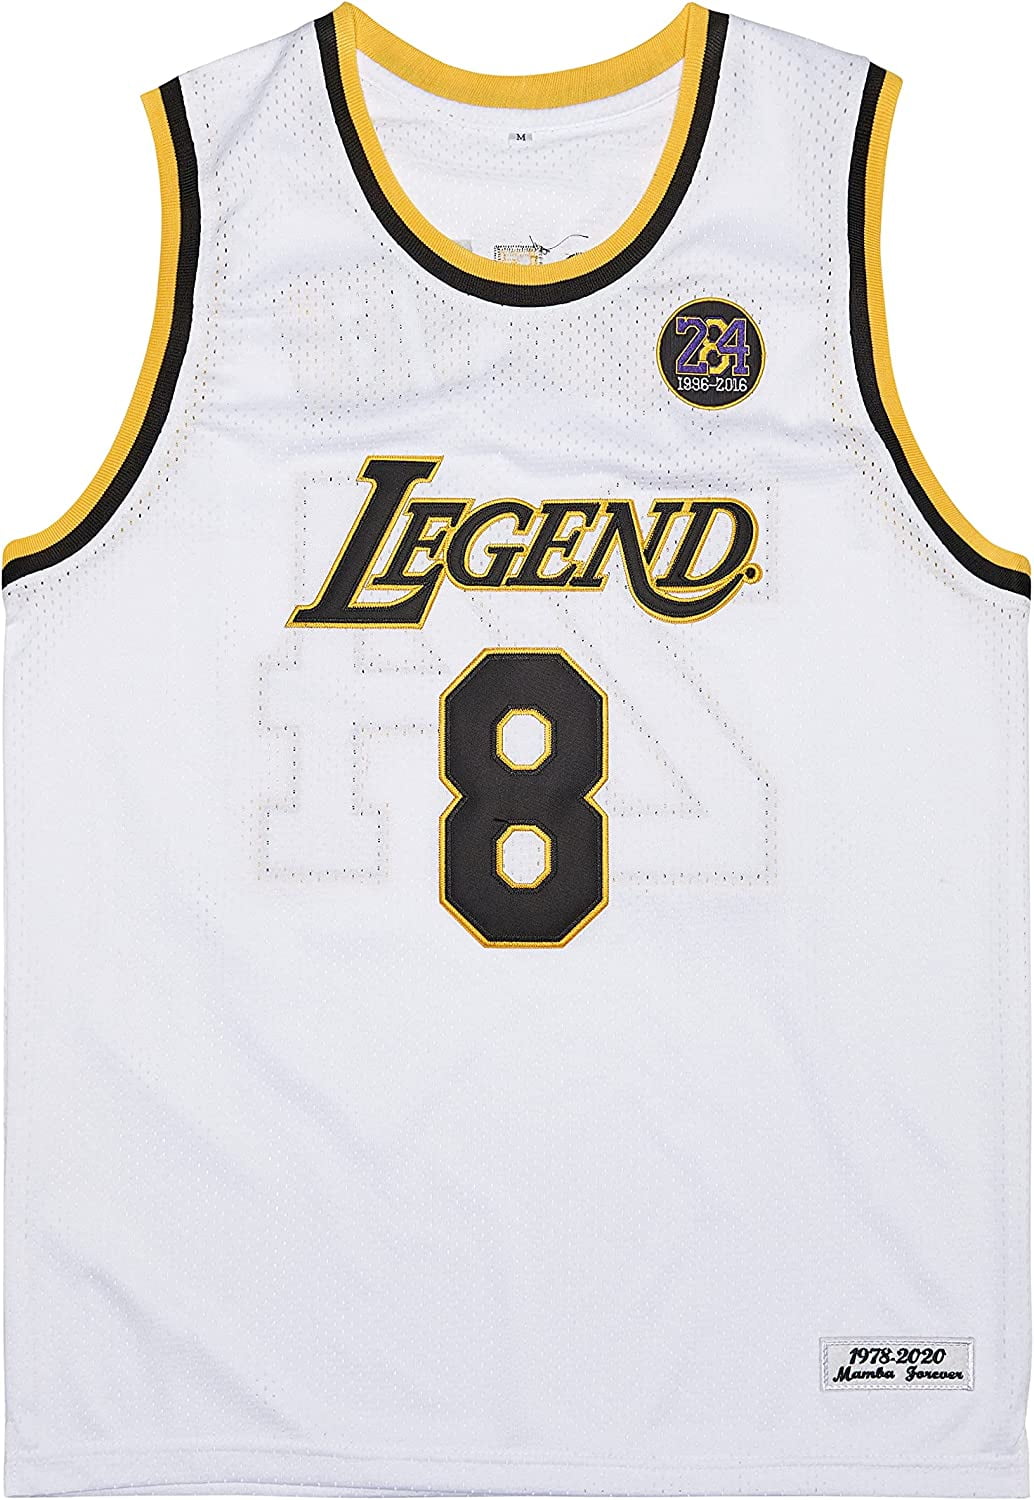  Men's Legend Forever 1996-2016 Fashion Christmas Basketball  Jersey Stitched : Clothing, Shoes & Jewelry